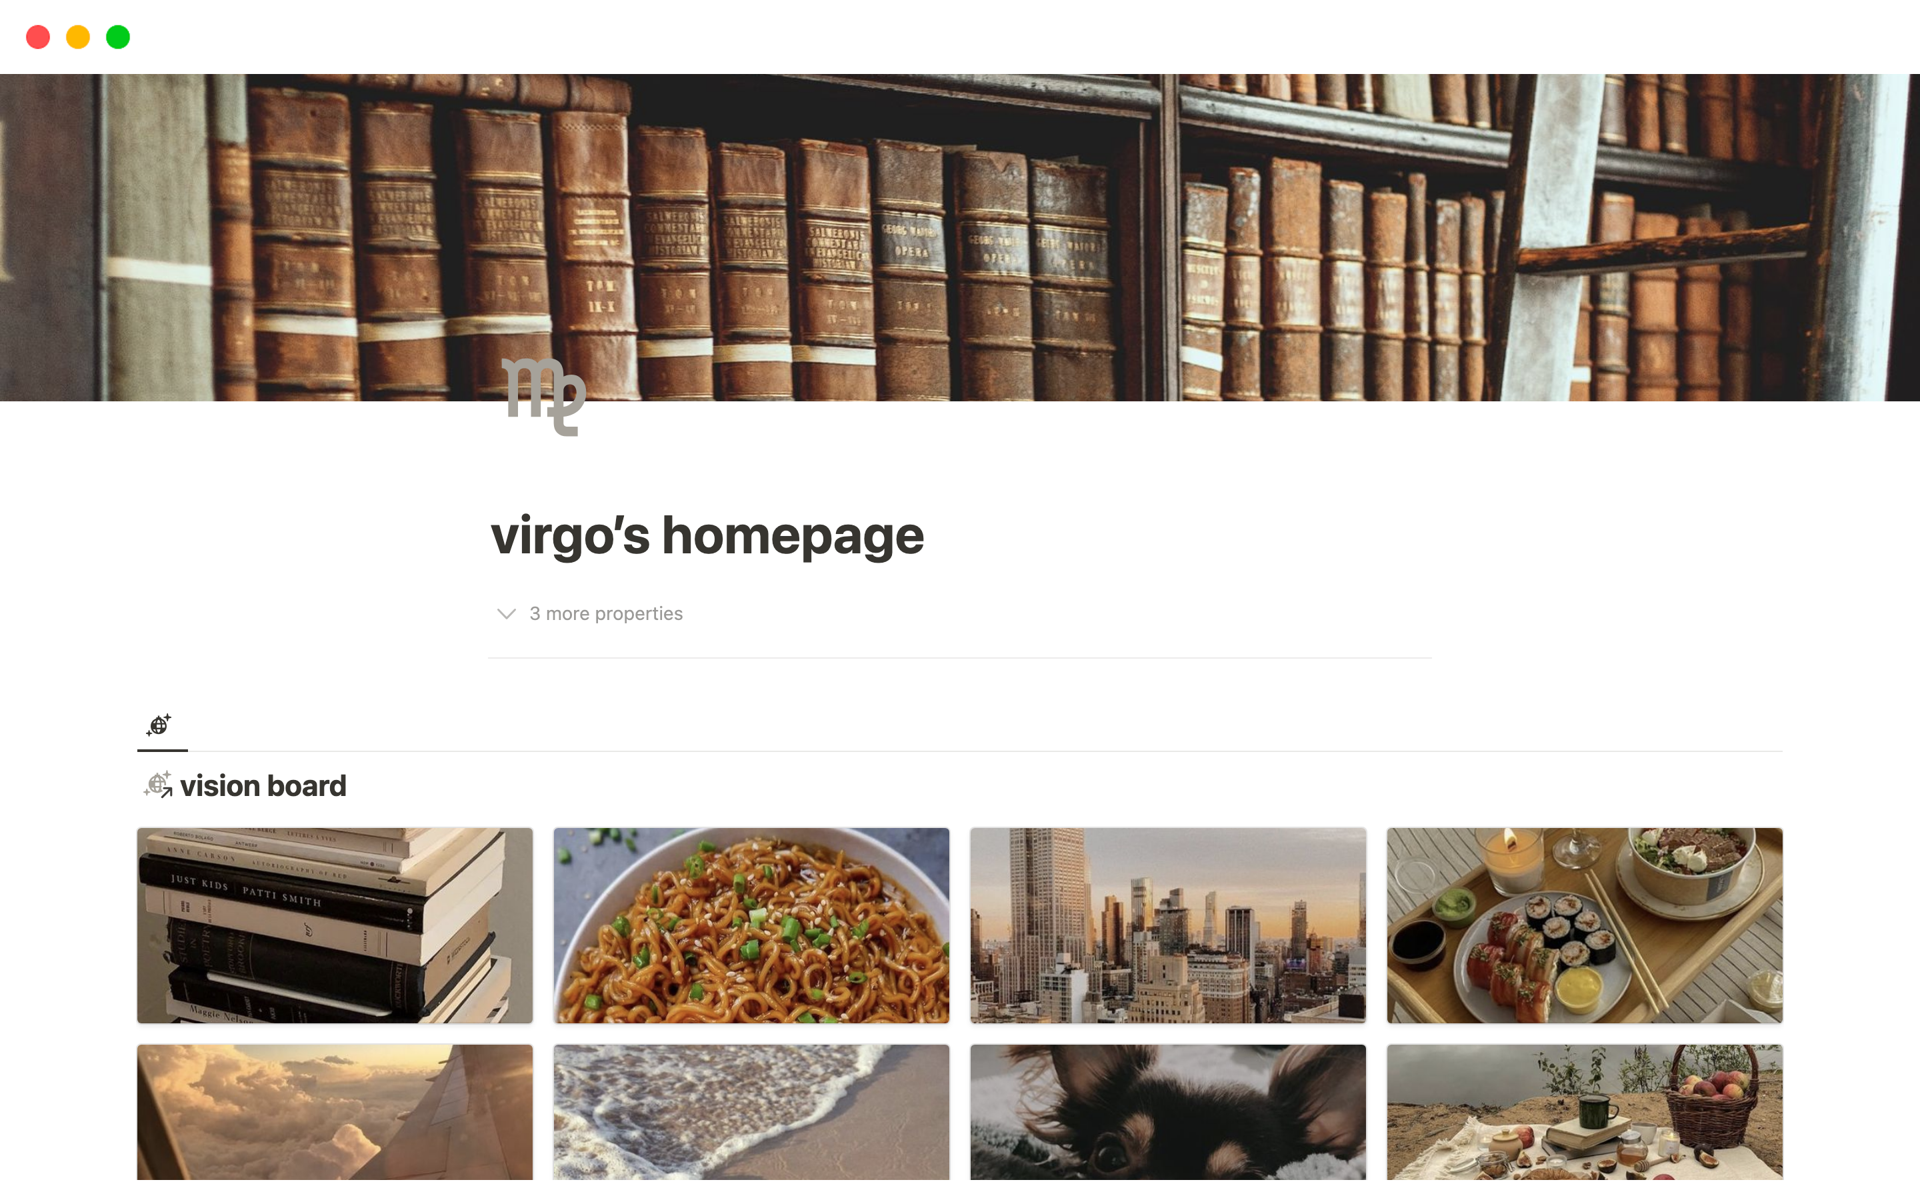 Personal planner for Virgos and bookworms